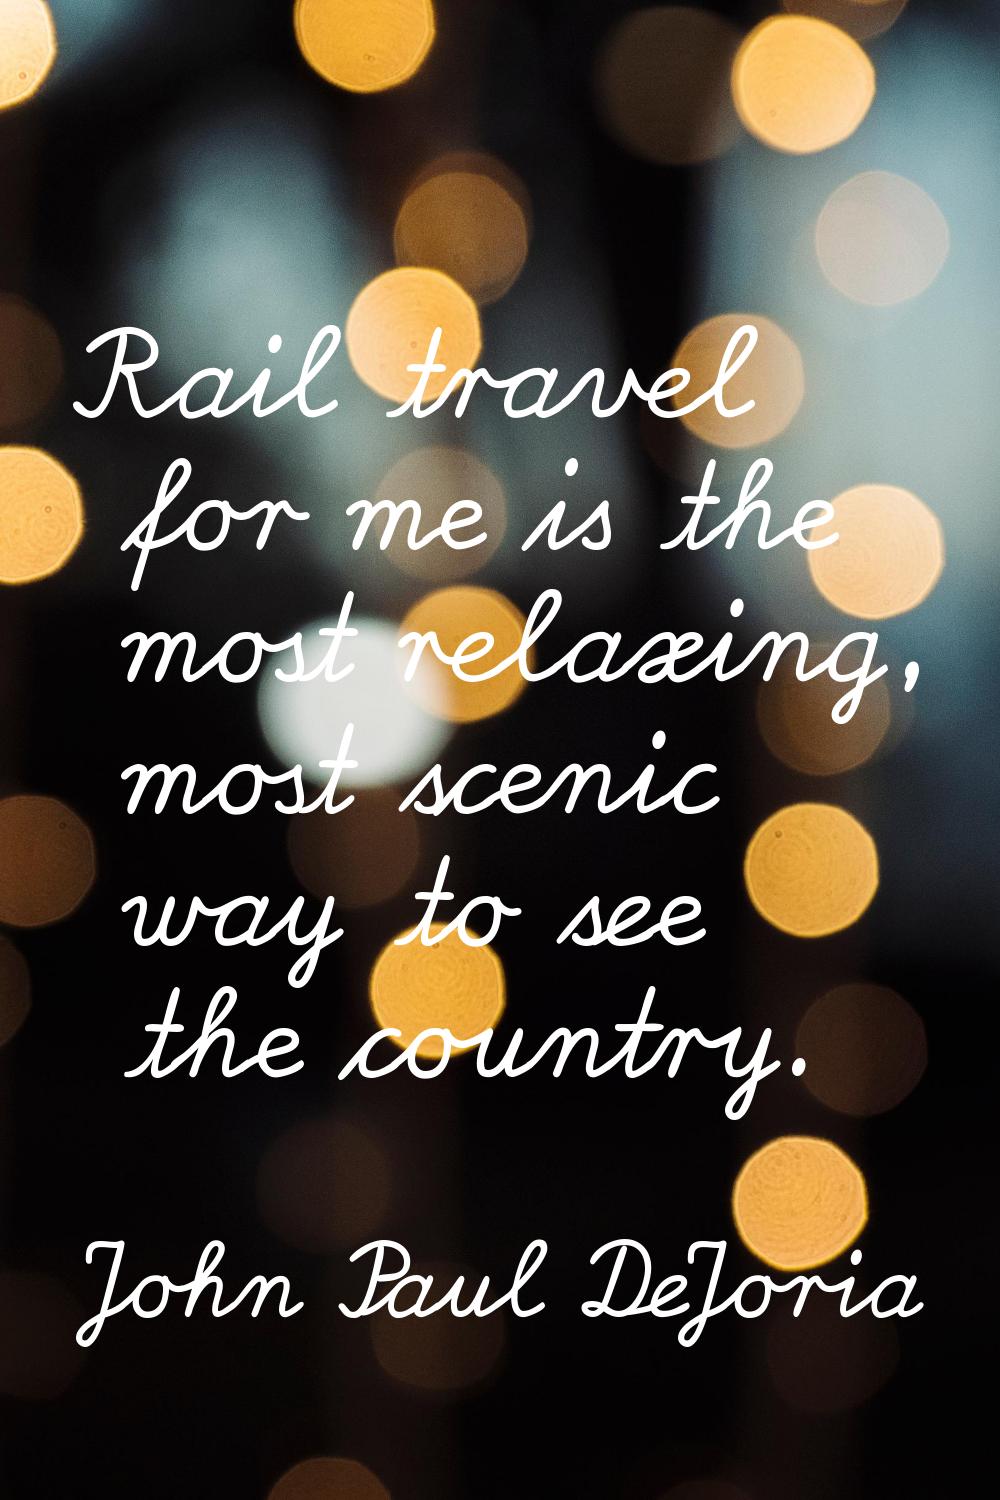 Rail travel for me is the most relaxing, most scenic way to see the country.